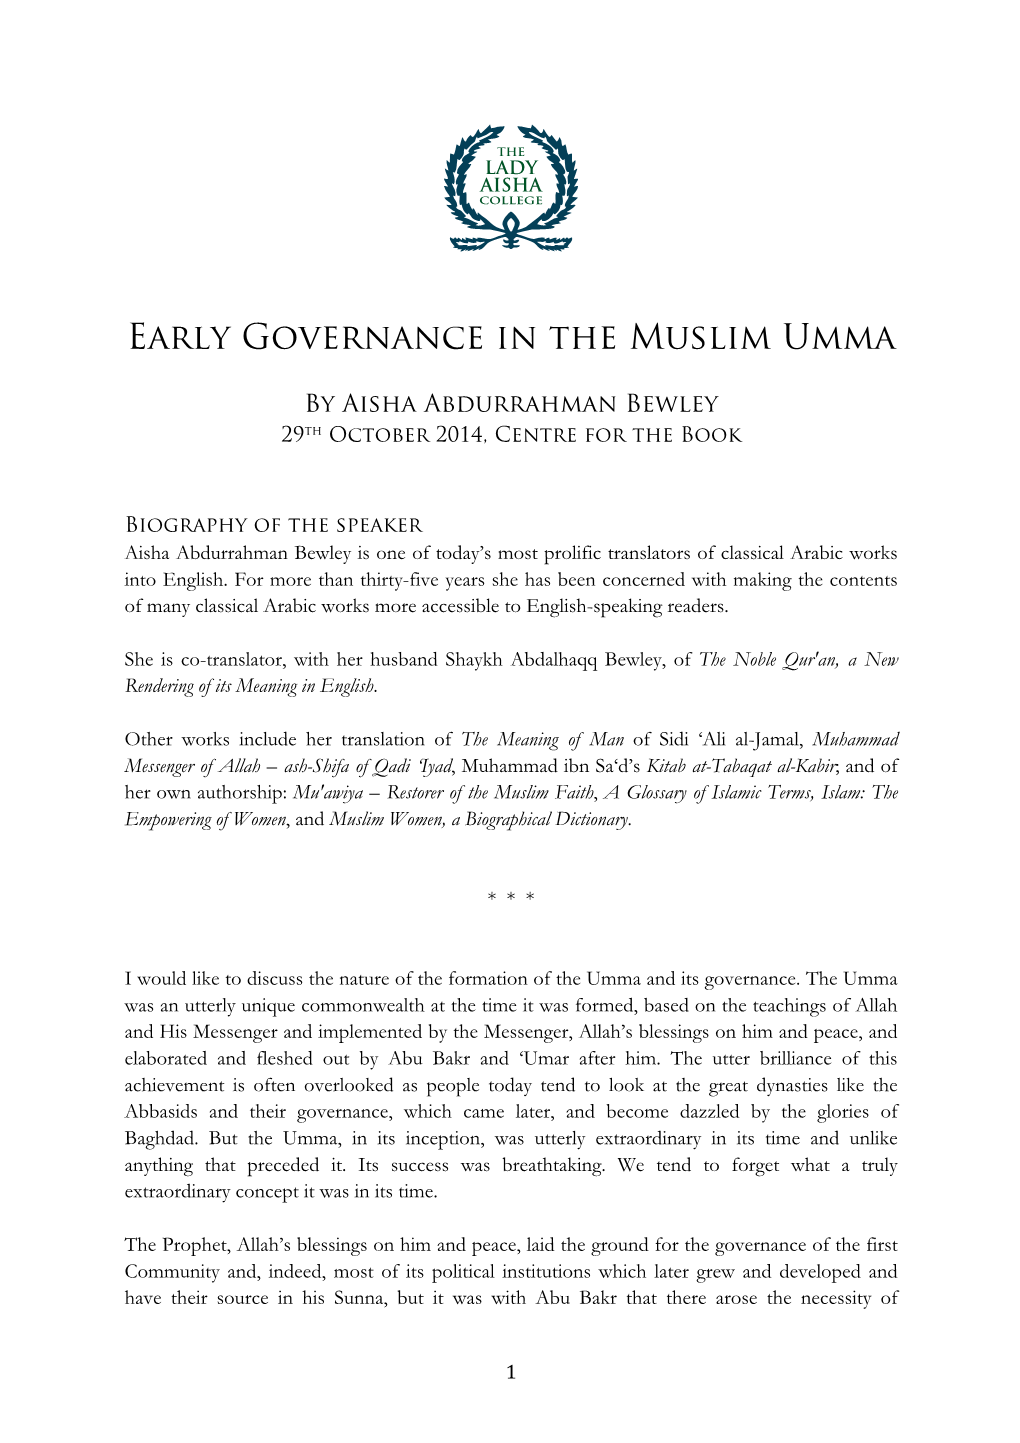 Early Governance in the Muslim Umma